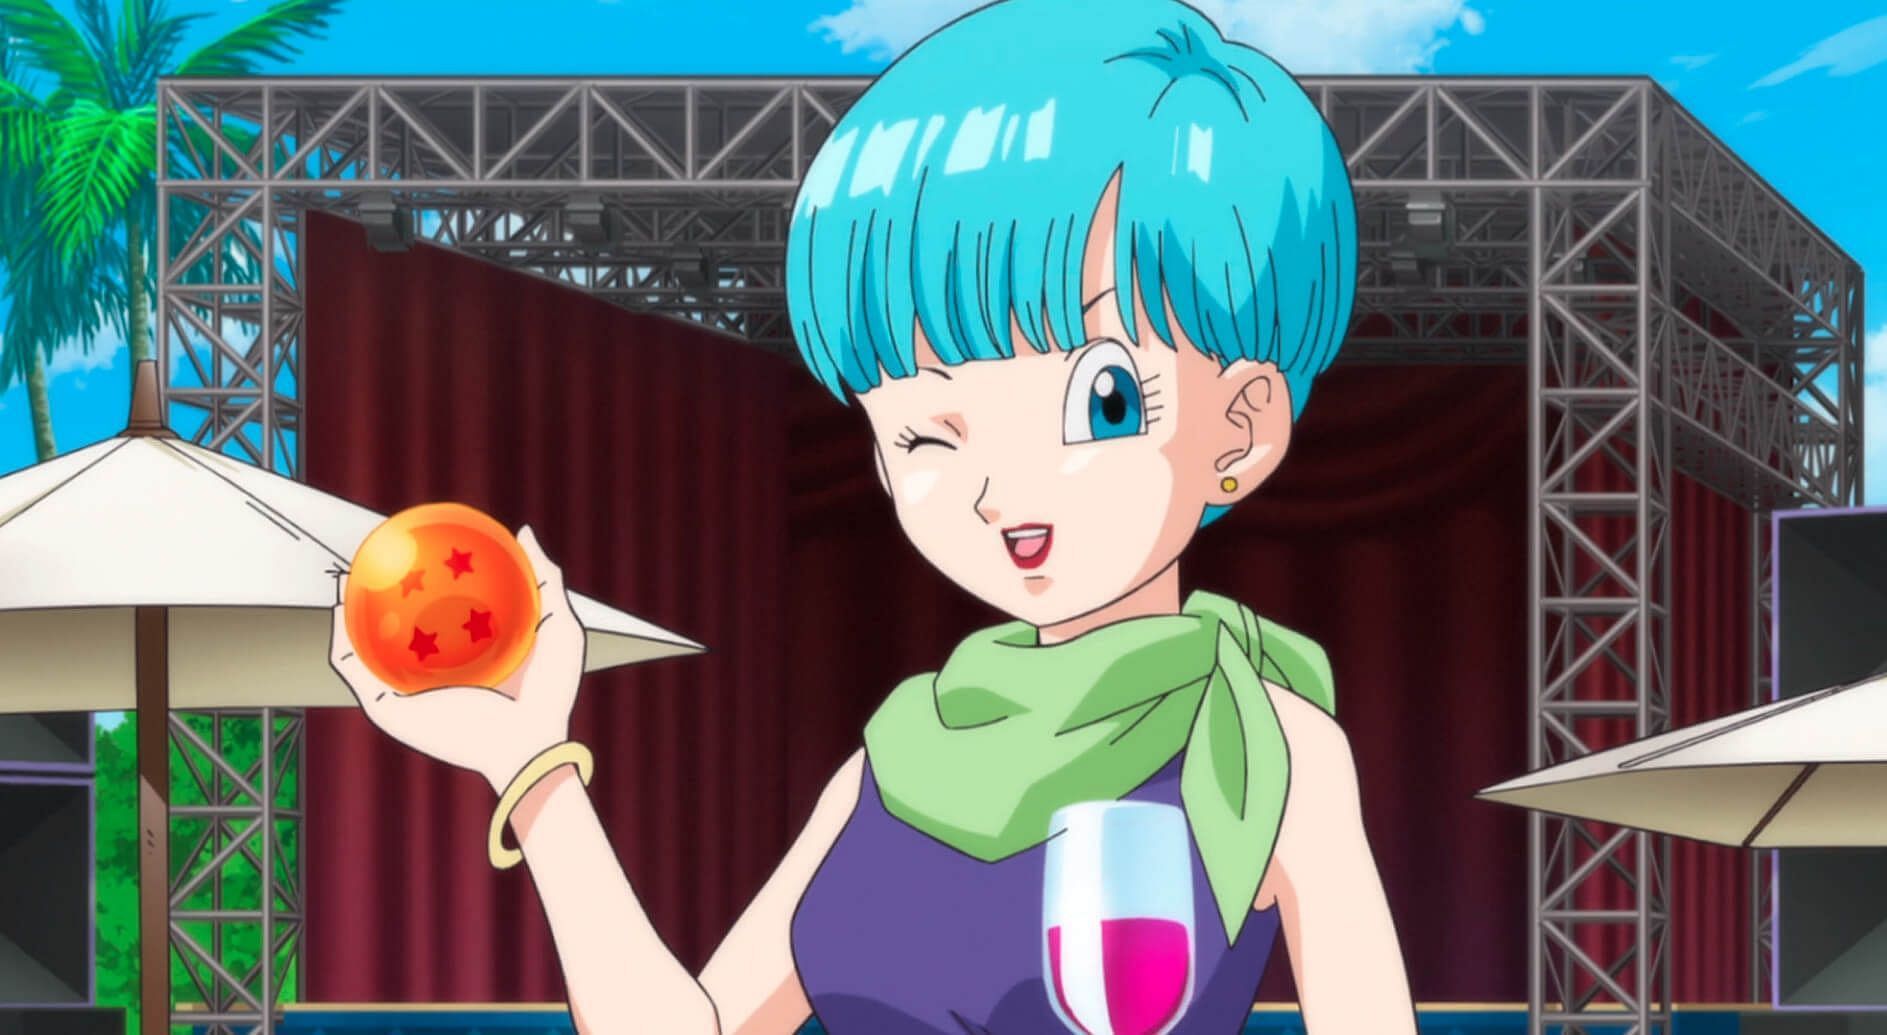 Bulma as she appears during her birthday party in the Dragon Ball Super anime (Image via Toei Animation)